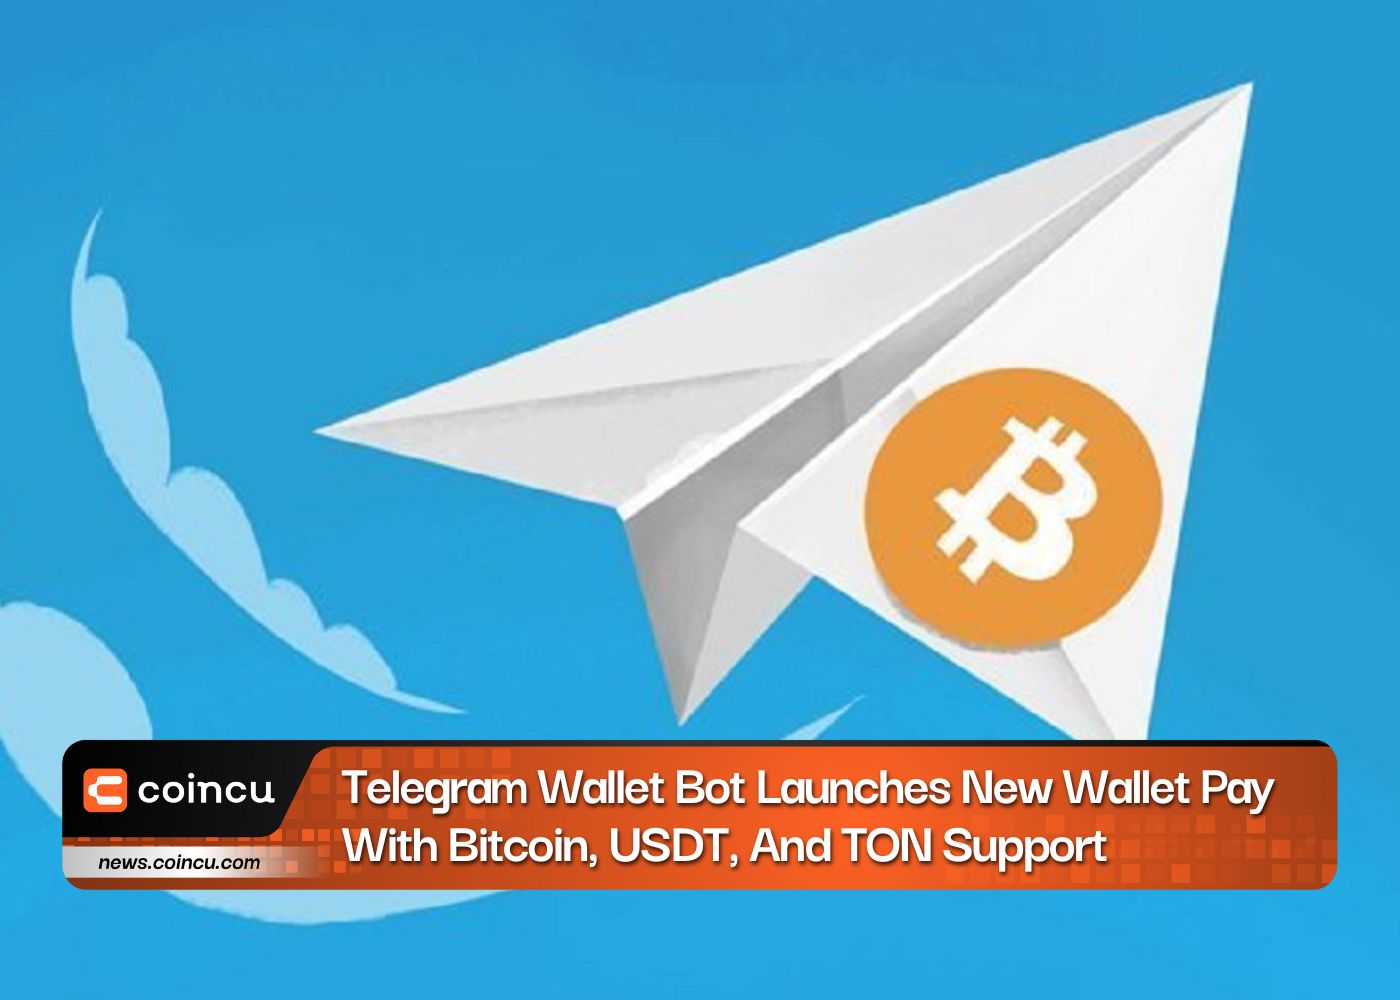 Telegram Wallet Bot Launches New Wallet Pay With Bitcoin, USDT, And TON Support